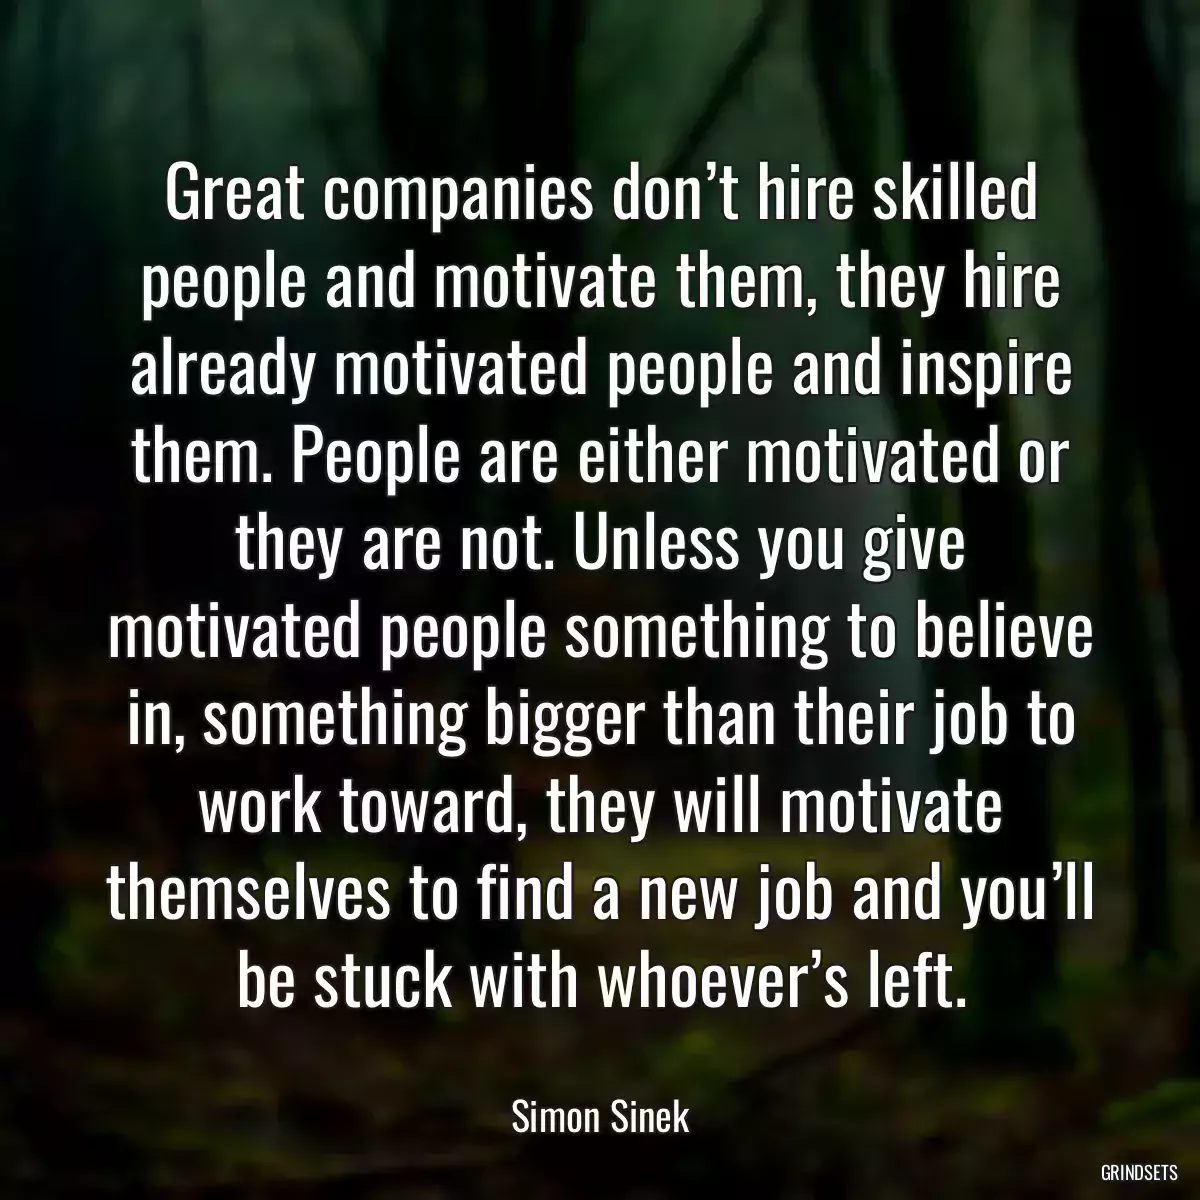 Great companies don’t hire skilled people and motivate them, they hire already motivated people and inspire them. People are either motivated or they are not. Unless you give motivated people something to believe in, something bigger than their job to work toward, they will motivate themselves to find a new job and you’ll be stuck with whoever’s left.